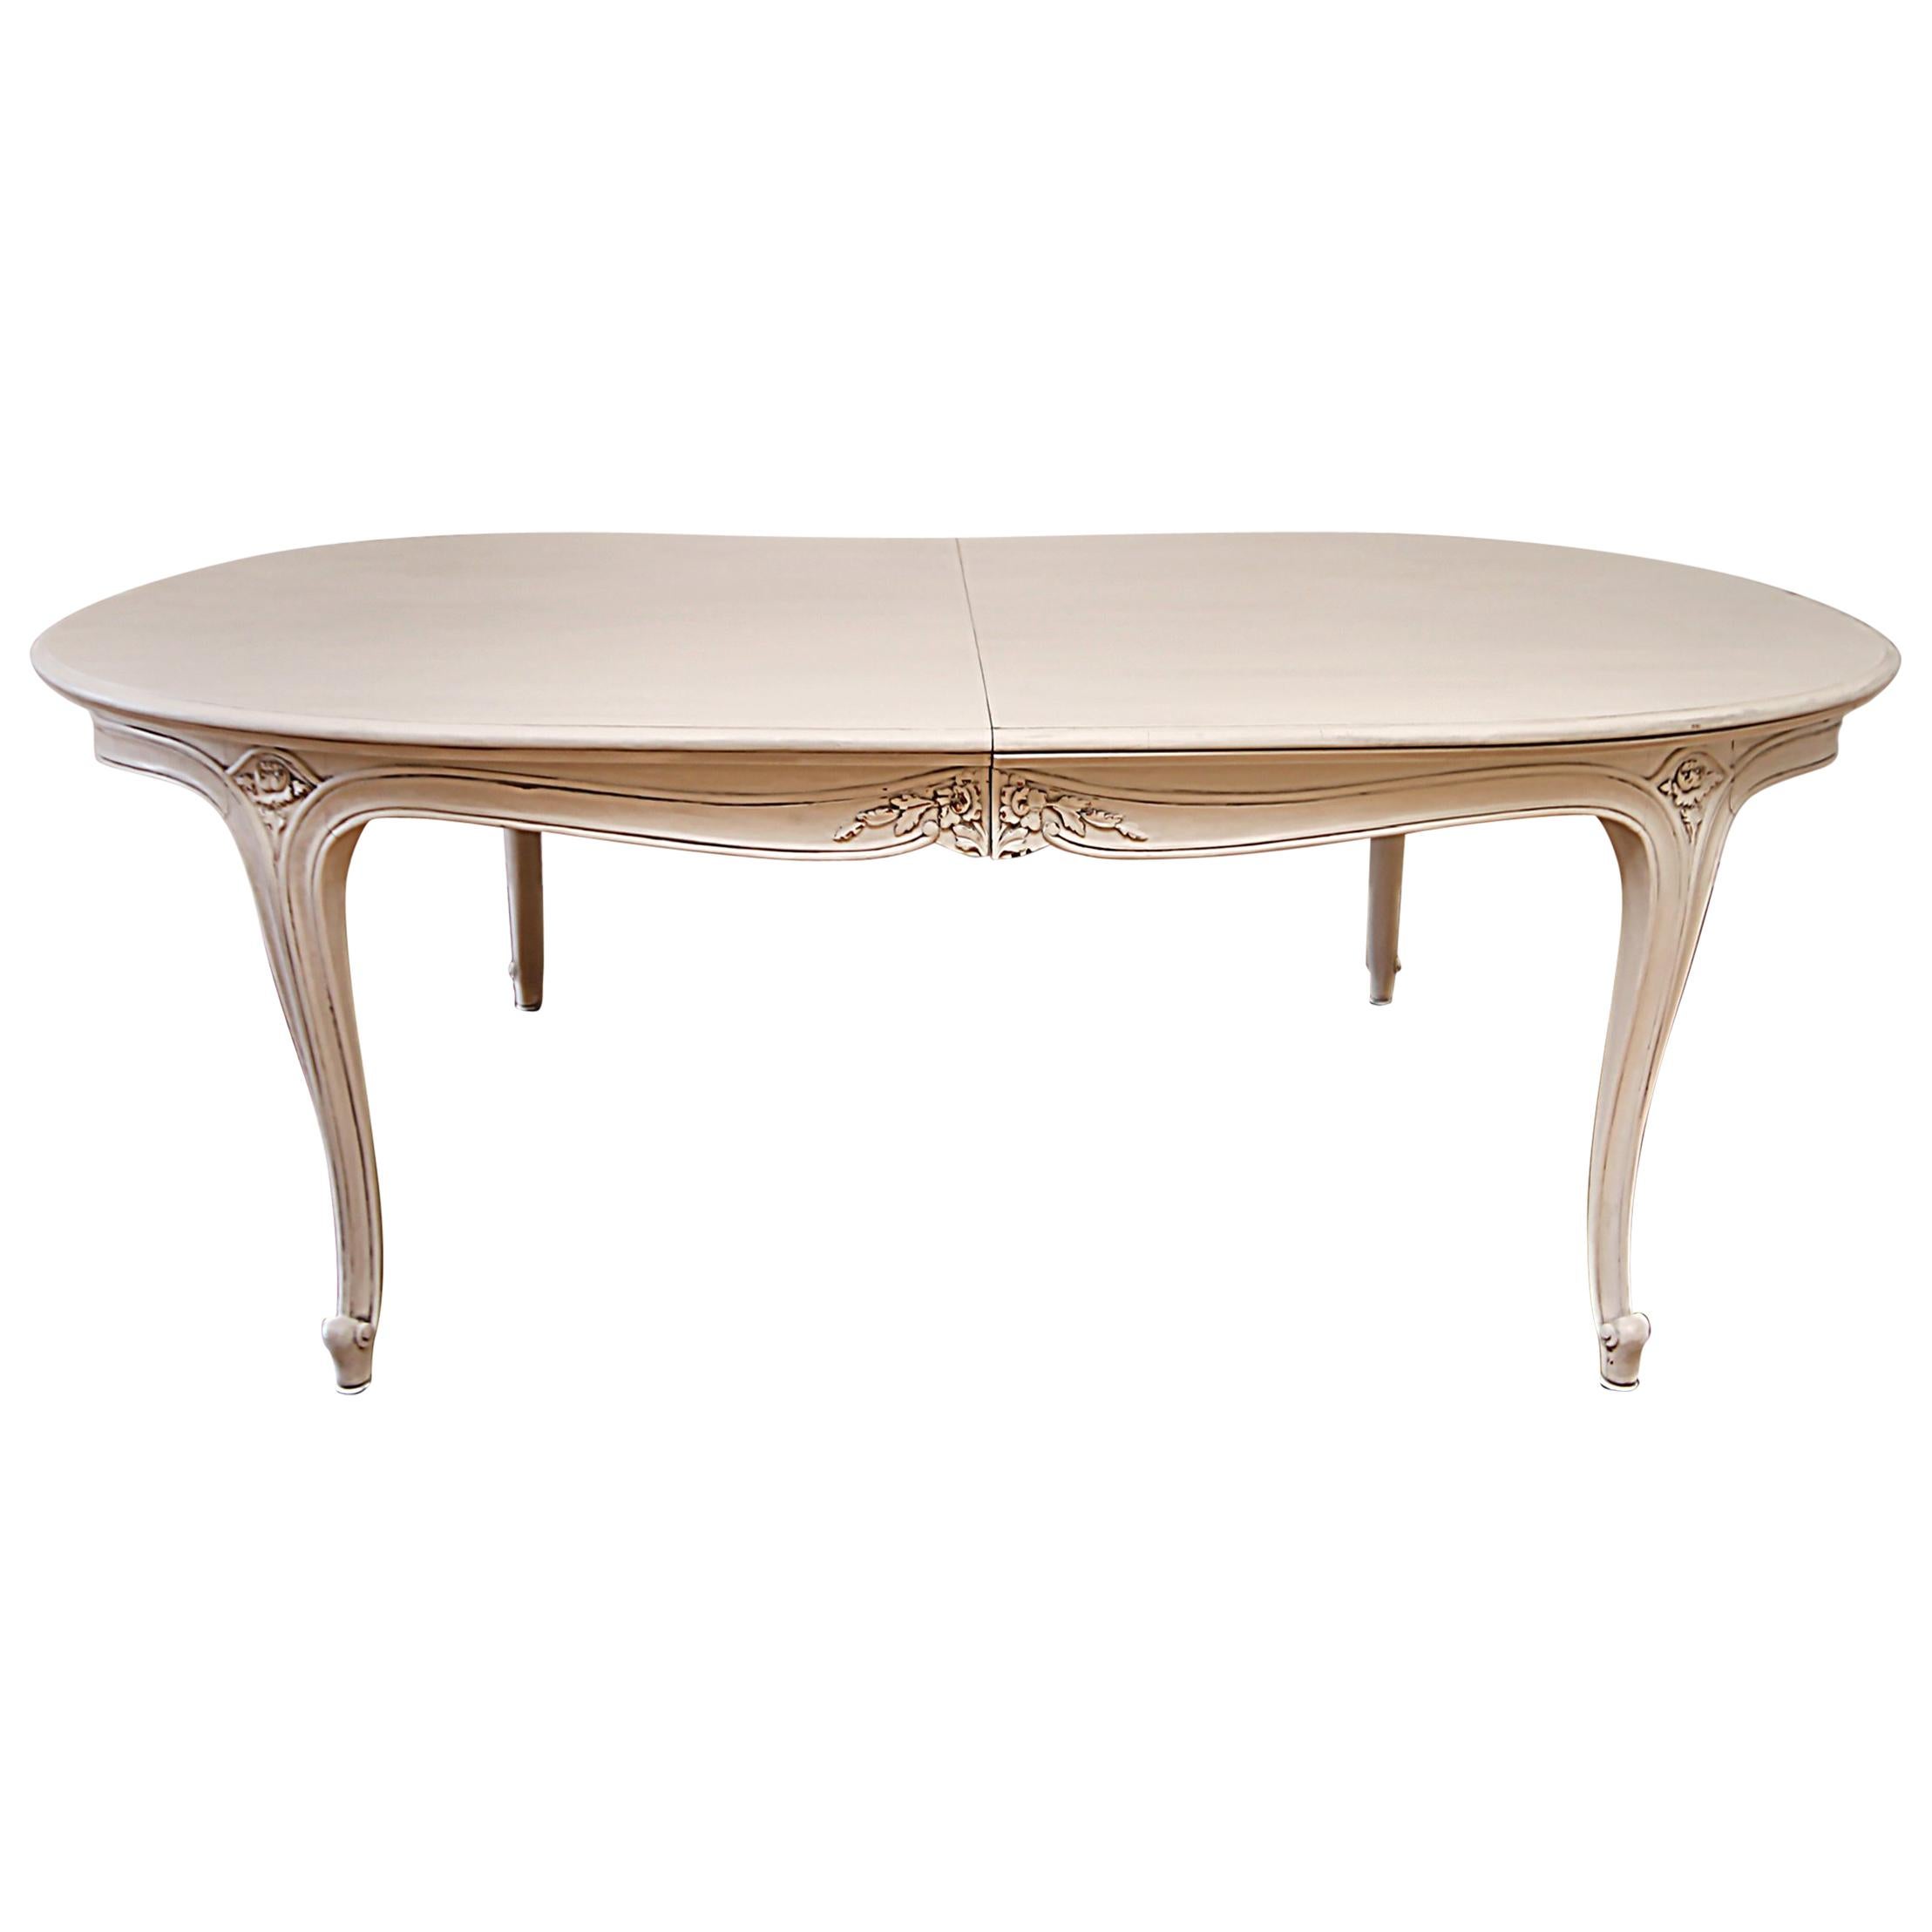 20th Century Louis XV Style Painted Dining Table with Leaves